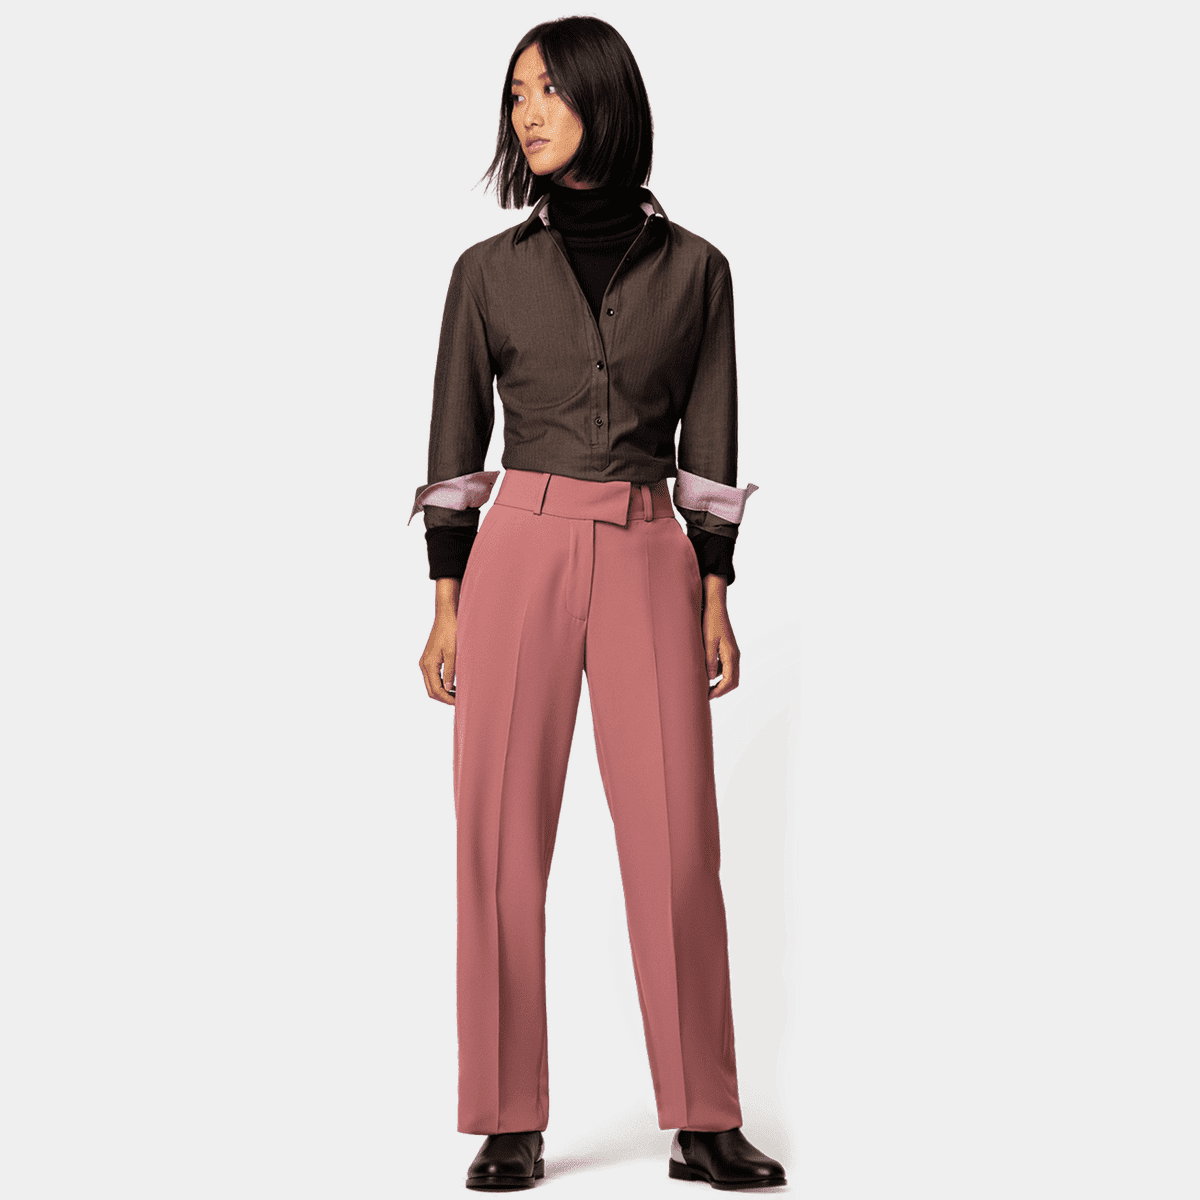 Women's Pink Pants  100% Made to measure - Sumissura